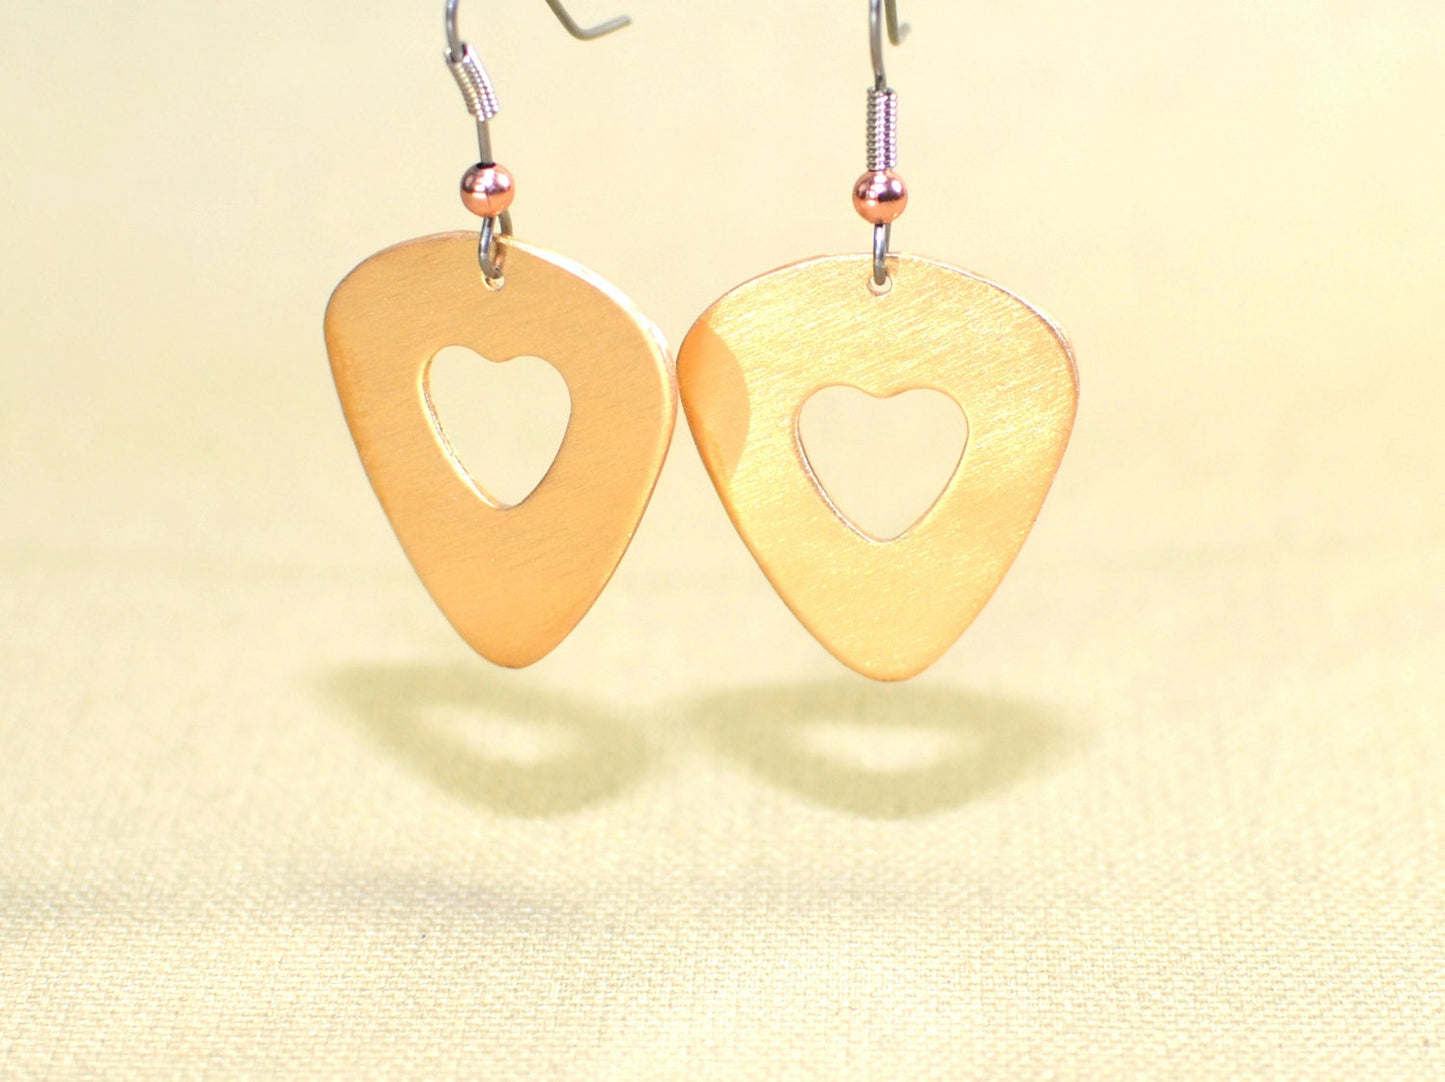 Bronze guitar pick earrings with cutout hearts